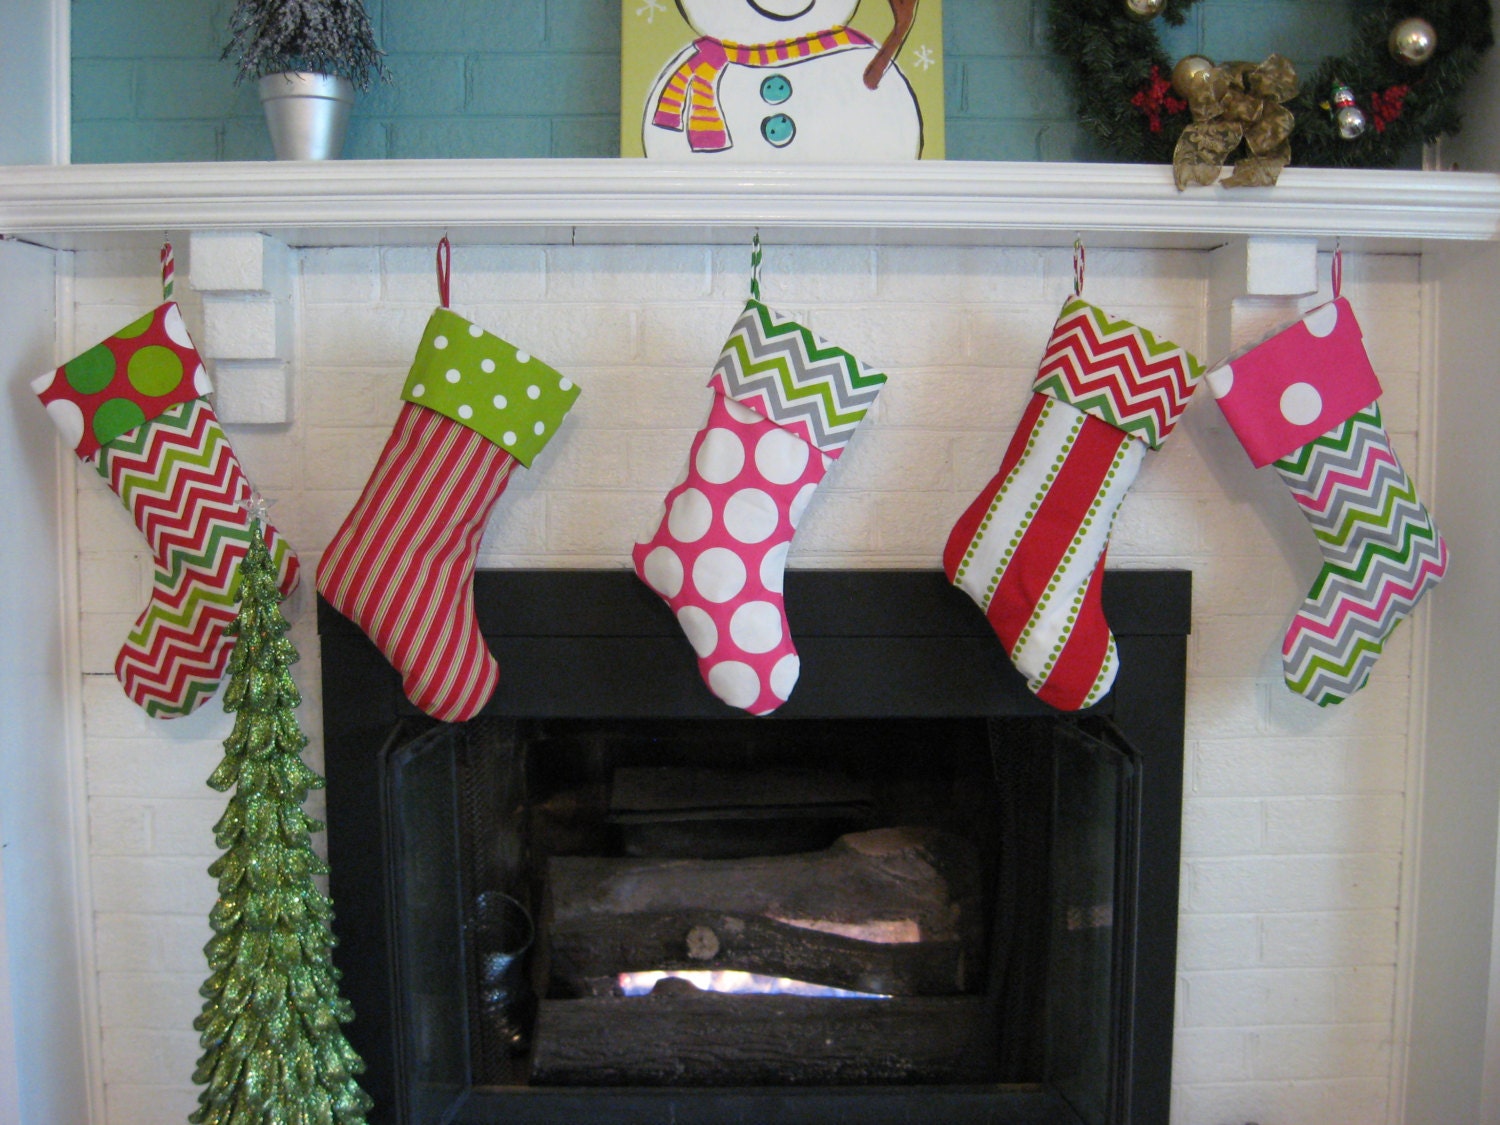 Christmas Stockings for the Family in Chevron - 4